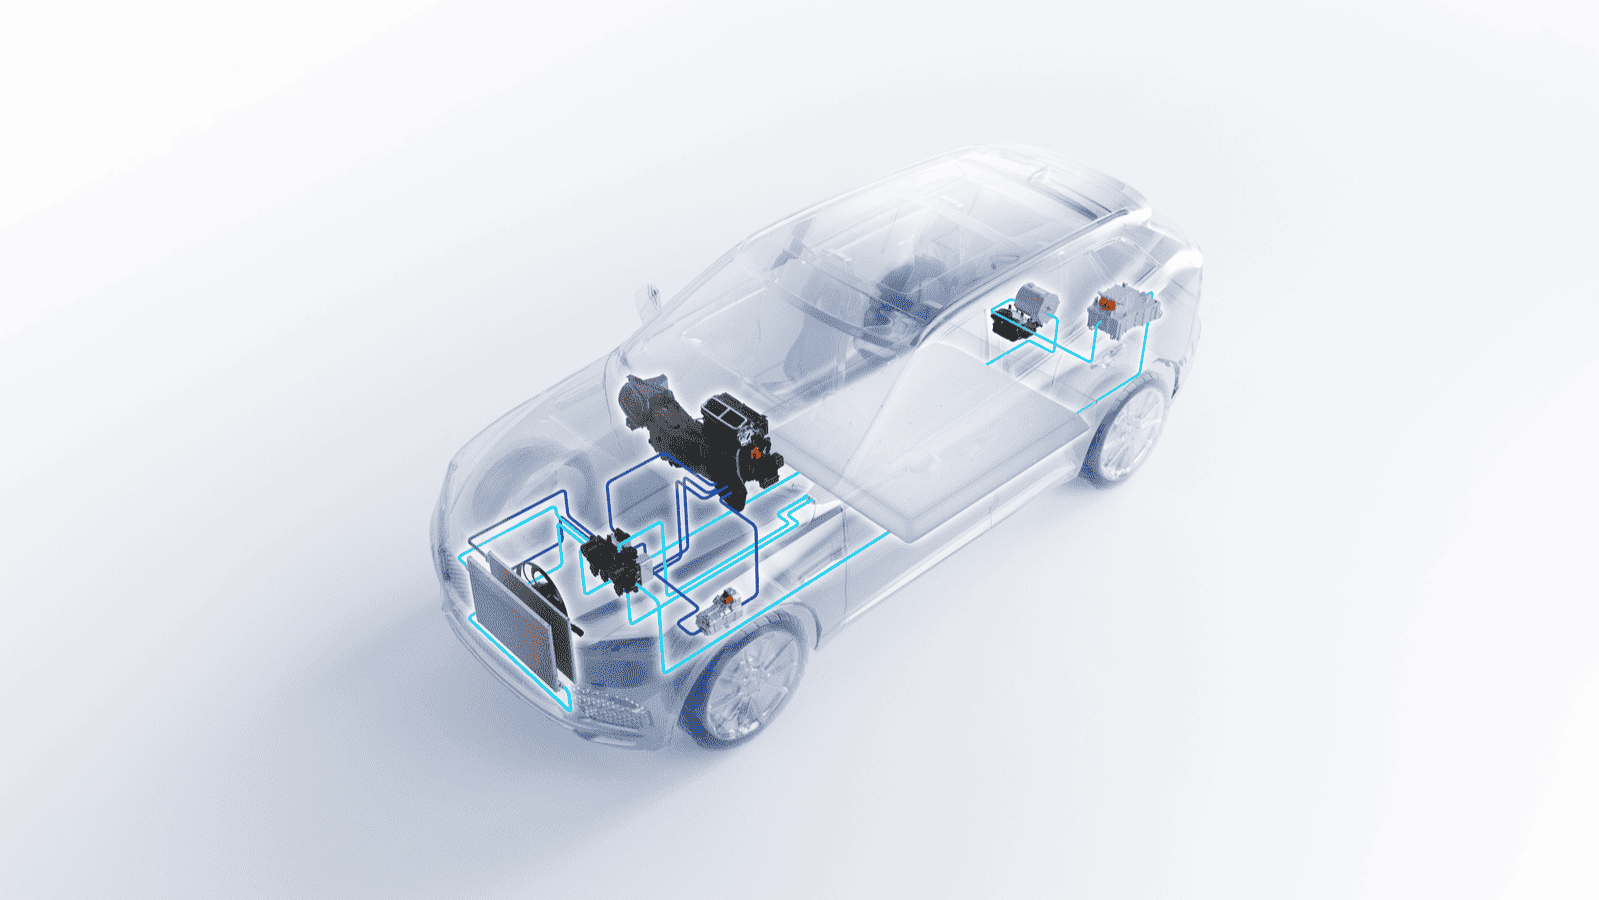 Image of MAHLE system competence in thermal management